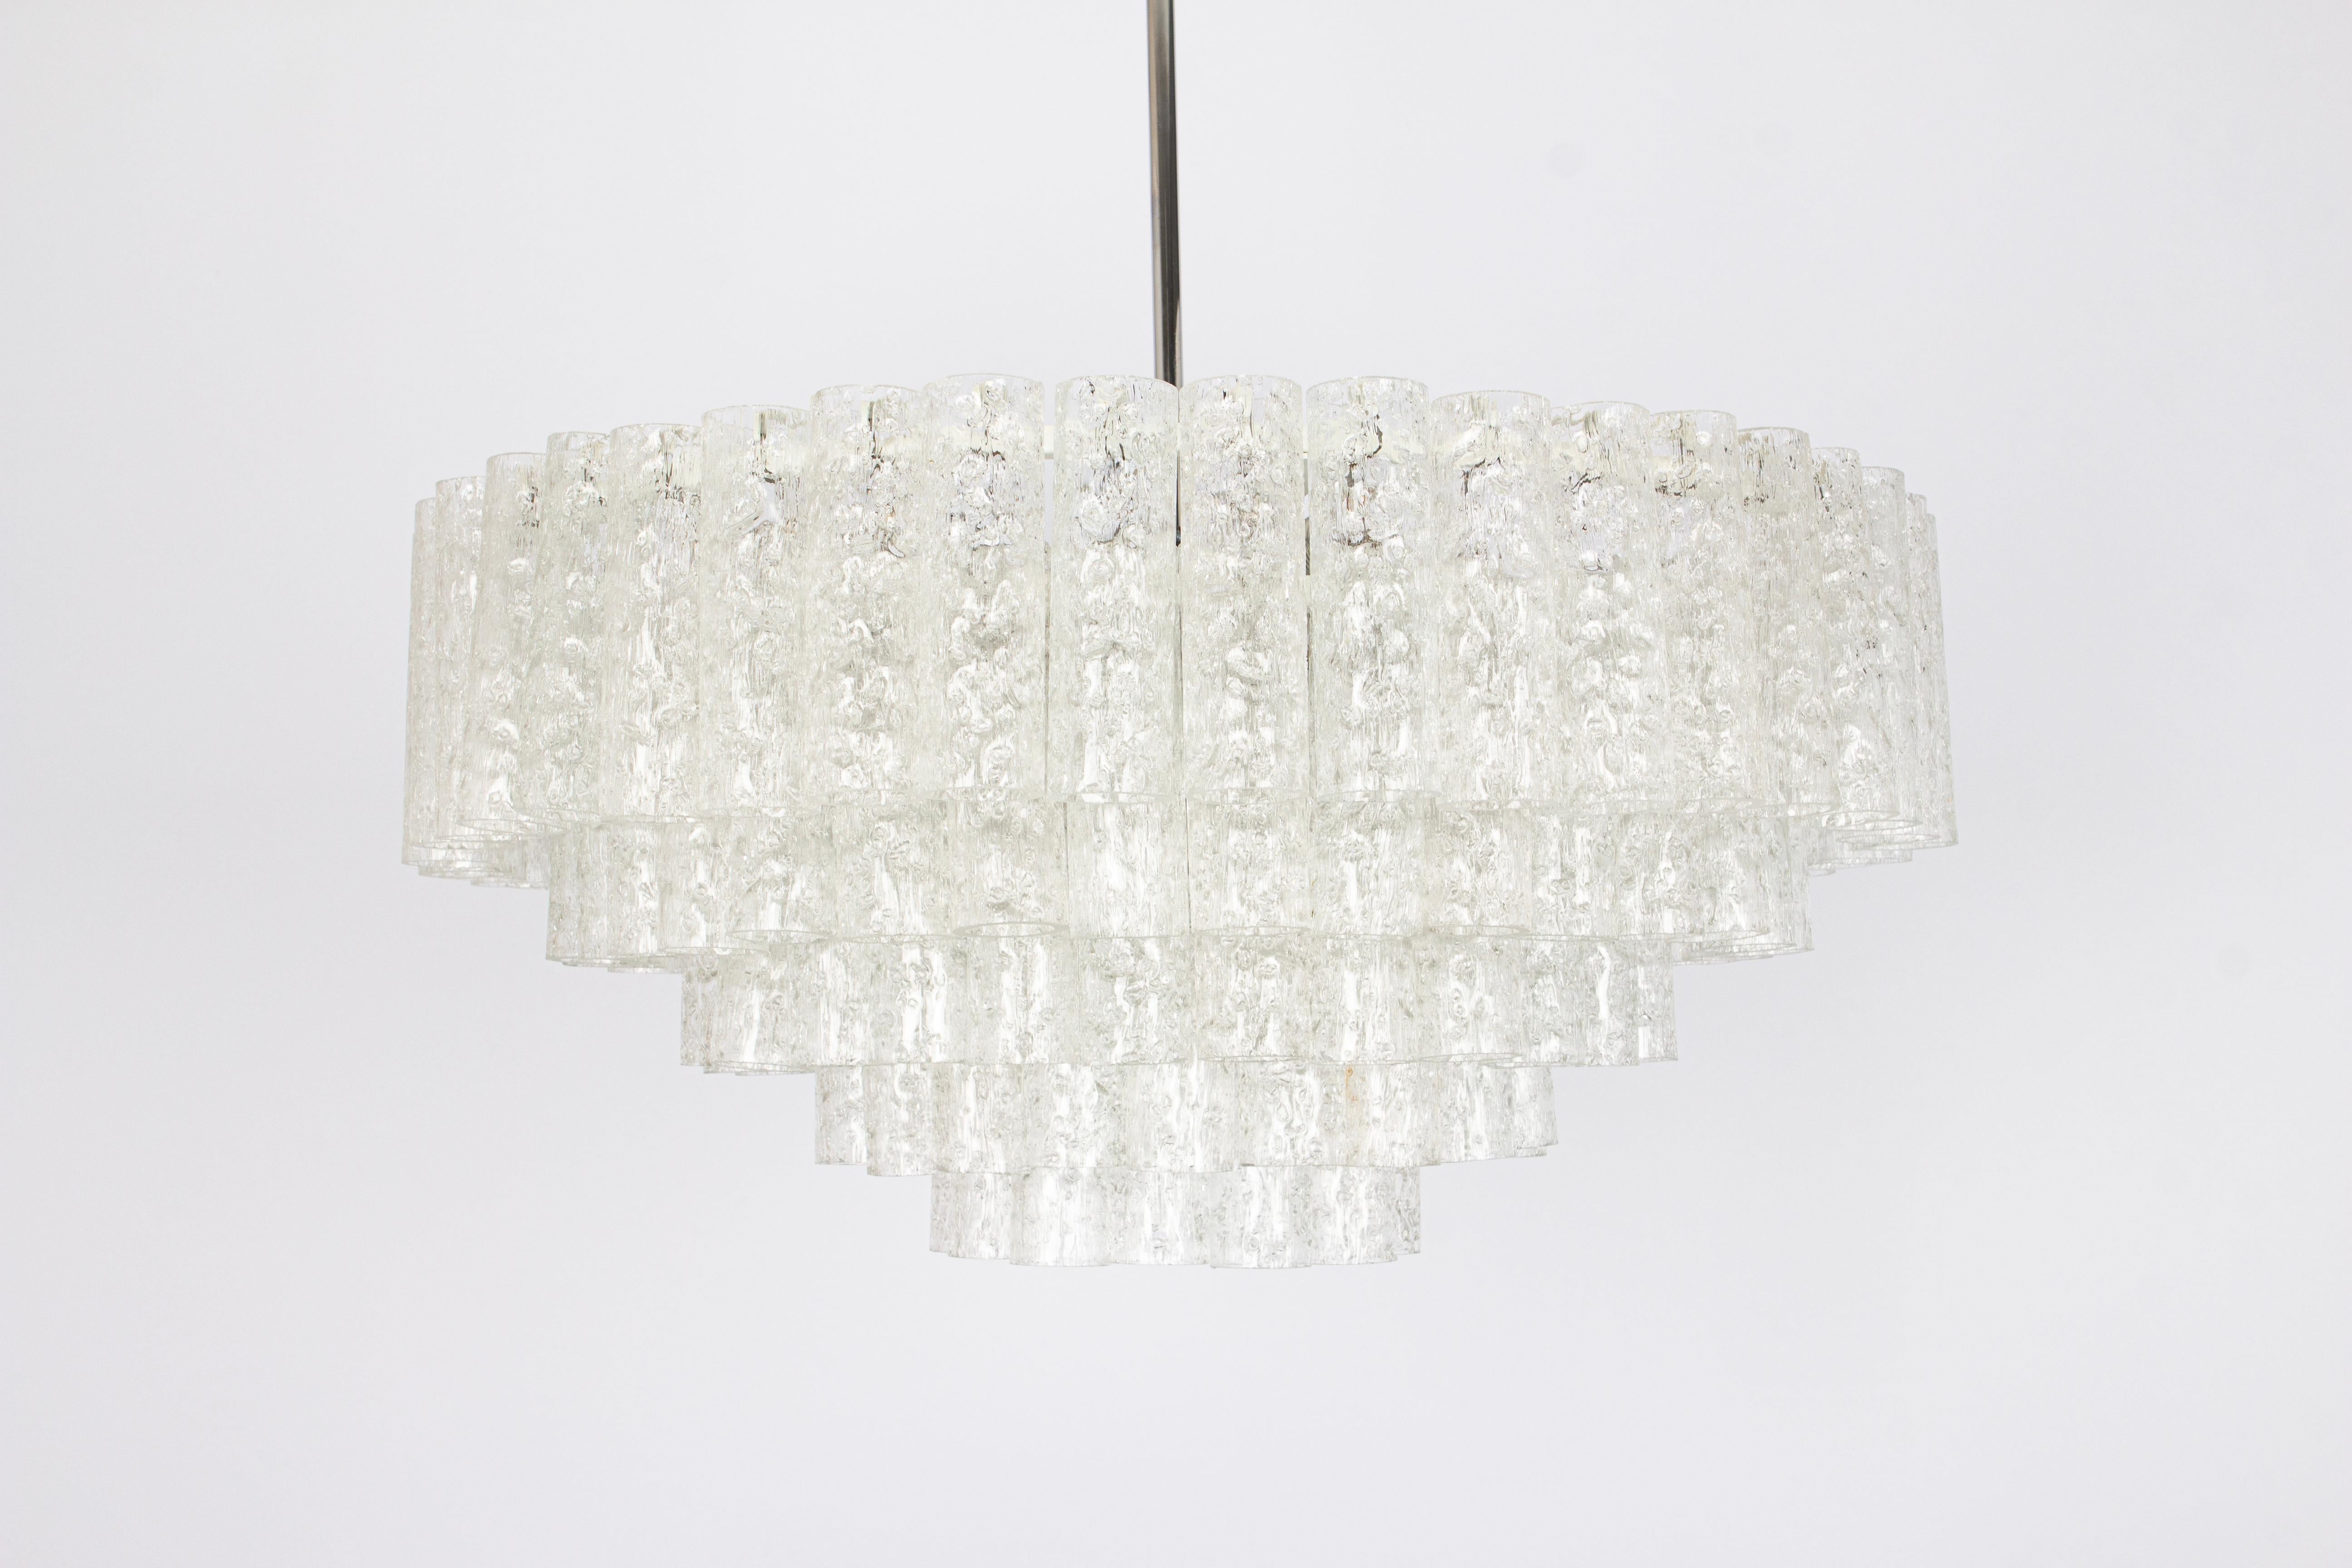 Fantastic five-tier midcentury chandelier by Doria, Germany, manufactured circa 1960-1969. 5 rings of Murano glass cylinders suspended from a fixture.

Sockets: 16 x E14 candelabra bulbs (up to 40 W each) .
Light bulbs are not included. It is